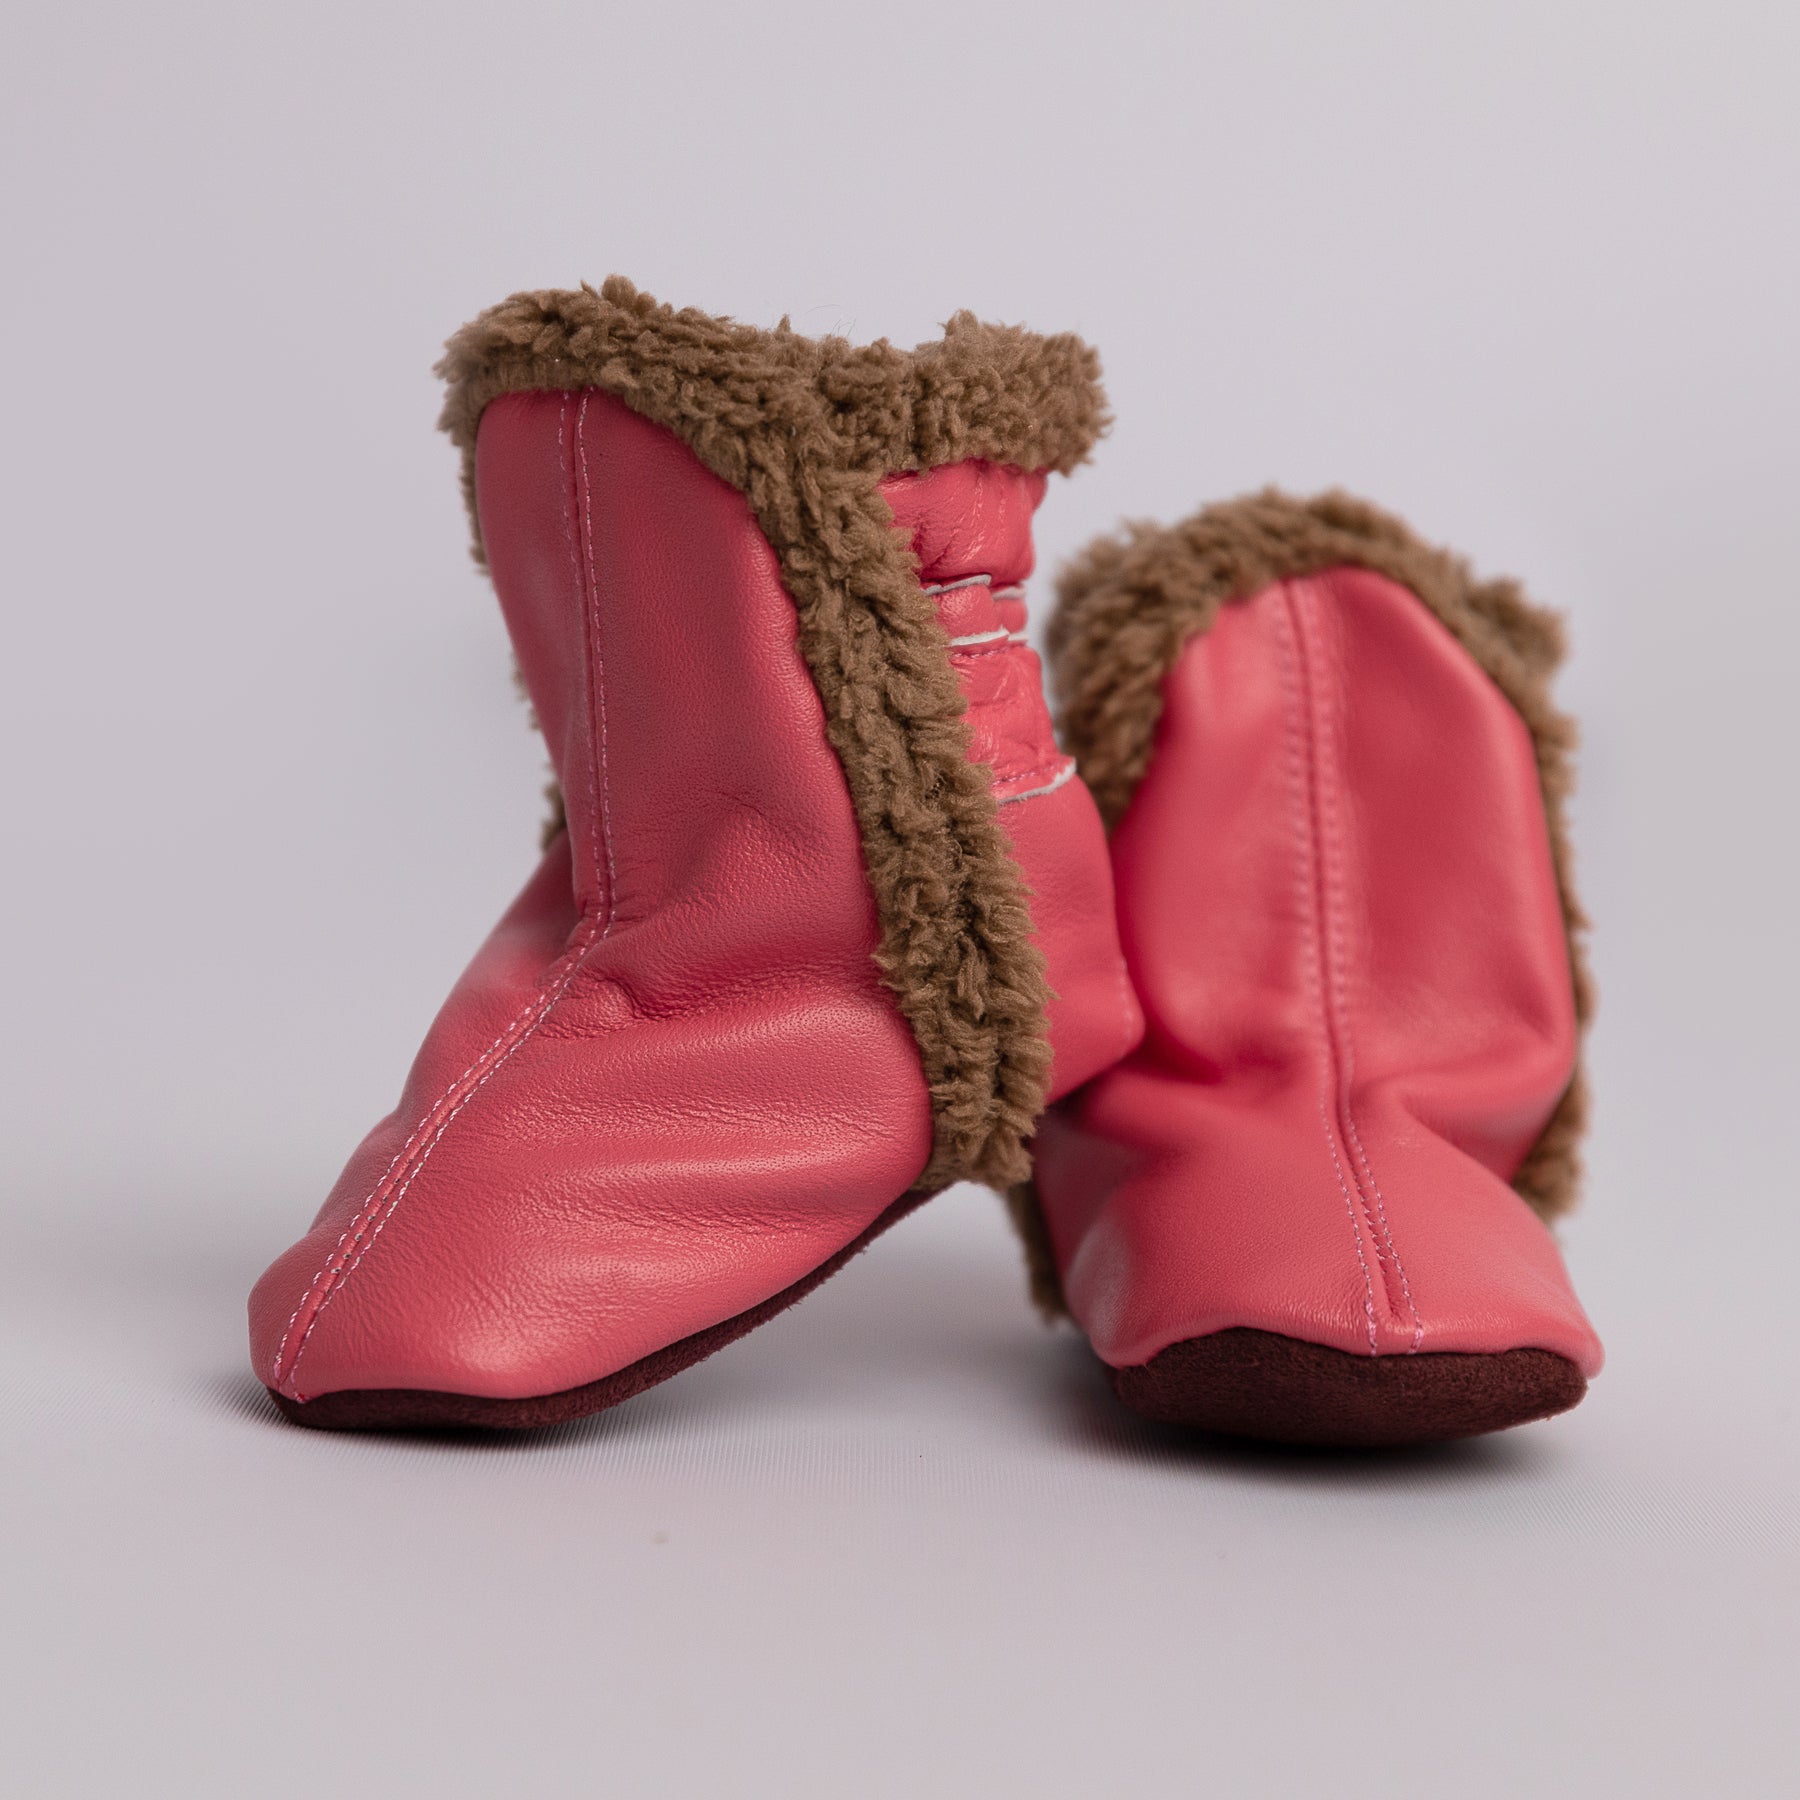 Baby & Toddler Fur Boots (Hot Pink)